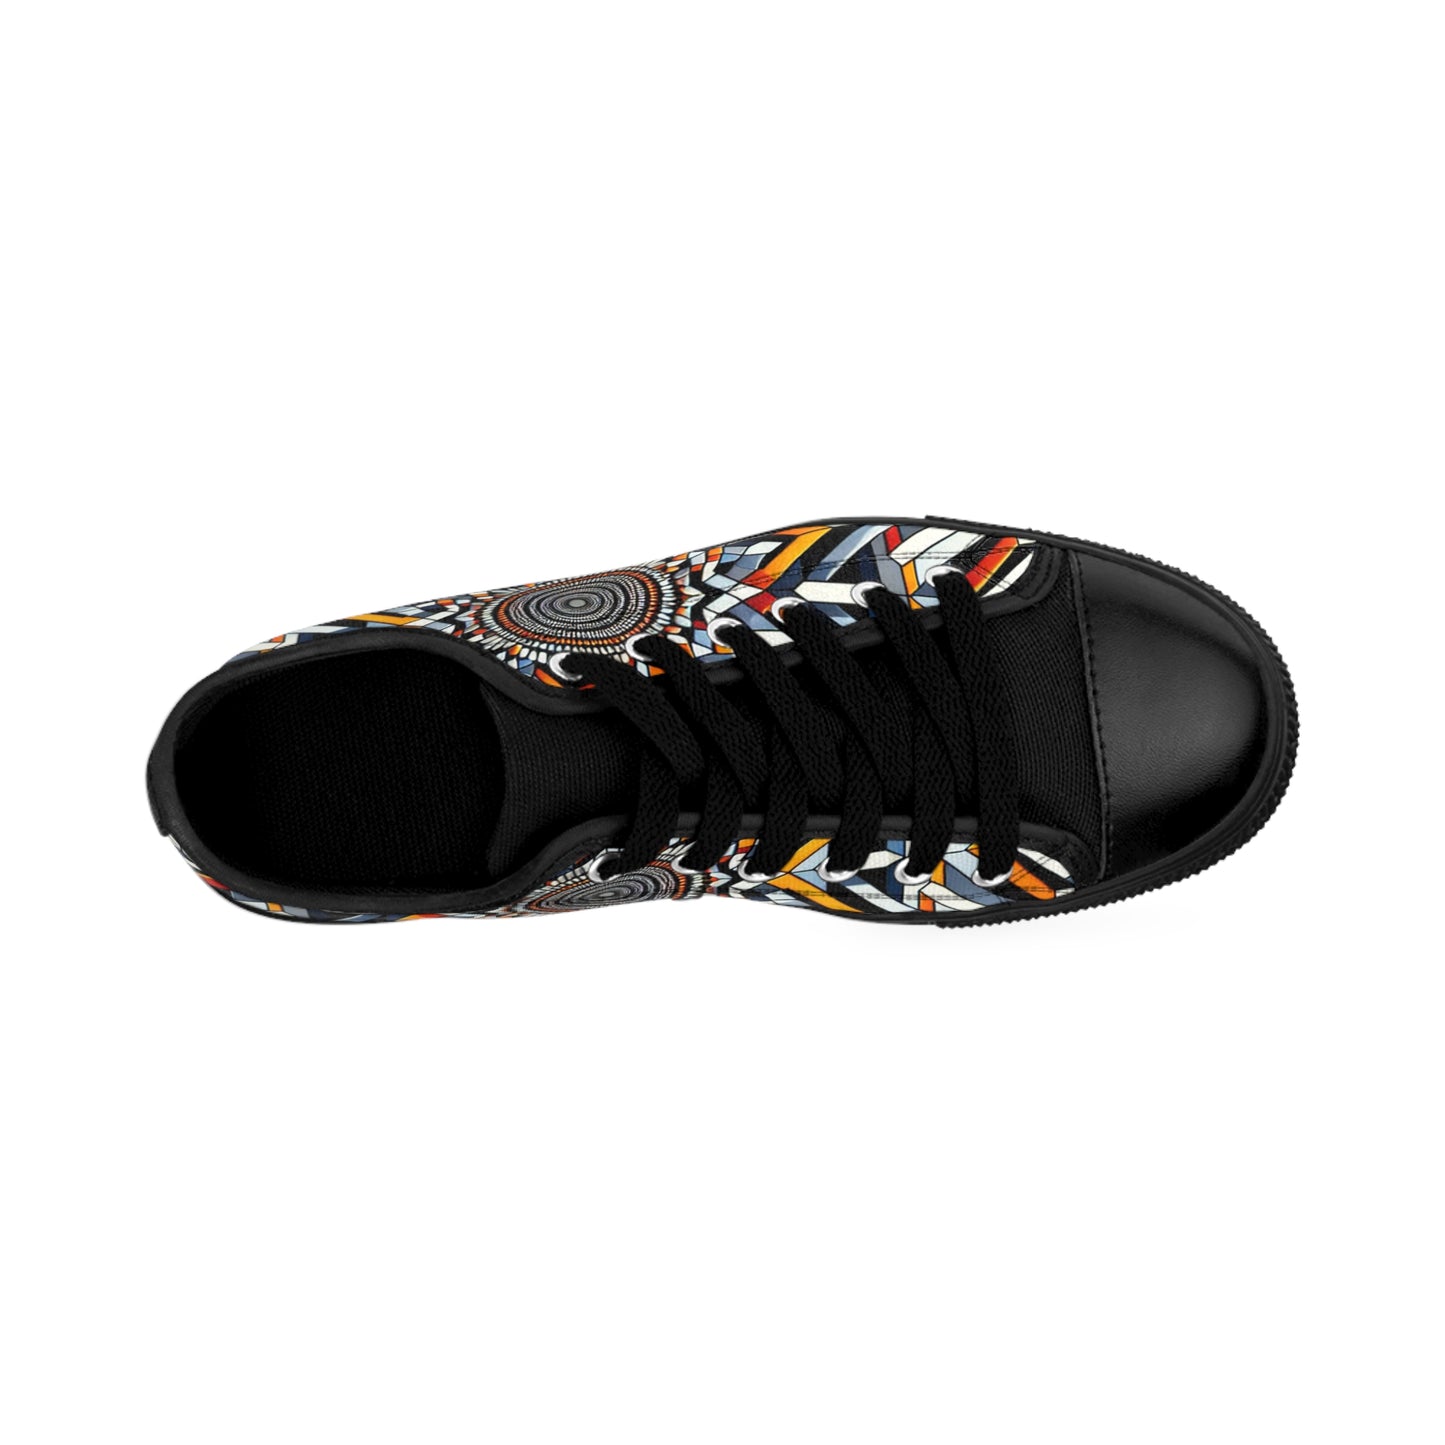 "HypnoSwirl Tapestry"- LowTop Shoes